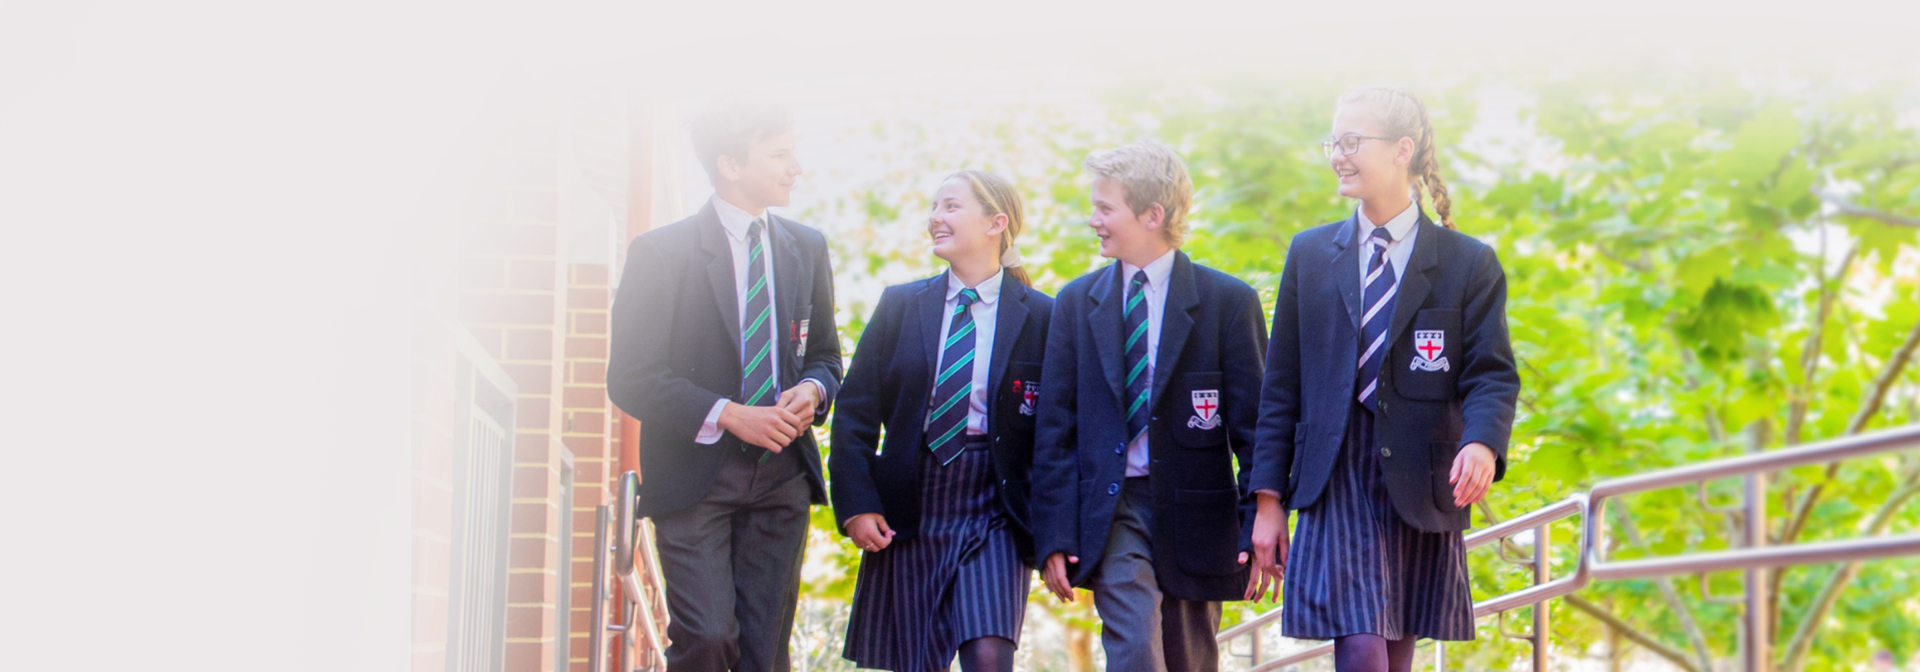 Byod Agreement Form Guildford Grammar School Bring Your Own Device Od